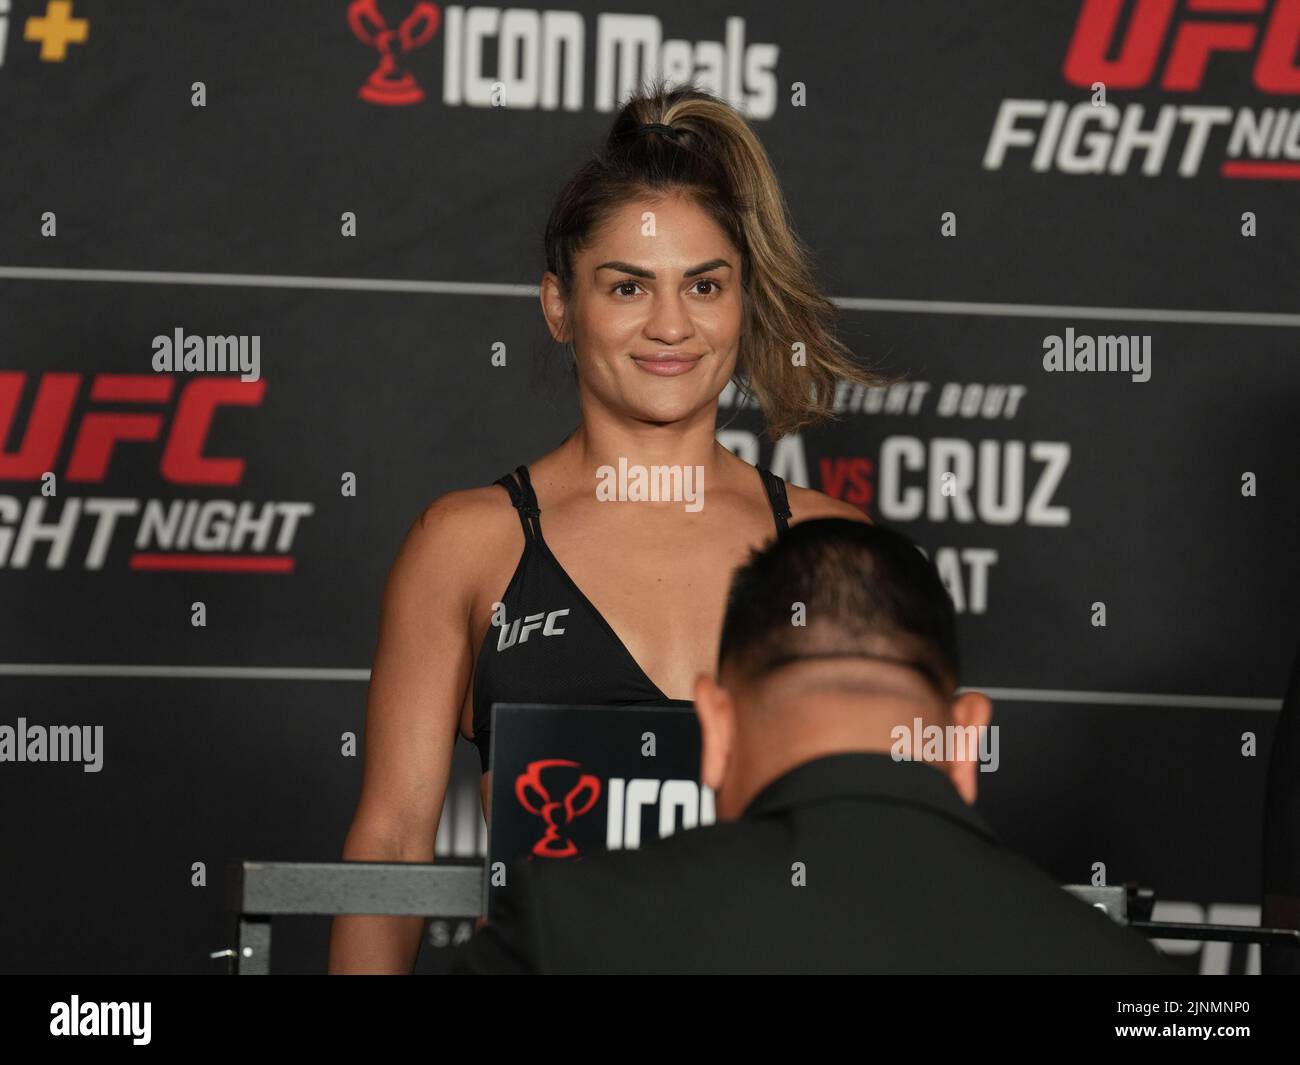 San Diego, USA. 12th Aug, 2022. SAN DIEGO, CA - August 12: Cynthia Calvillo  steps on the scale for the official weigh-in at the Sheraton San Diego Hotel & Marina for UFC Fight Night - Vera vs Cruz : Official Weigh-in on August 12, 2022 in SAN DIEGO, United States. (Photo by Louis Grasse/PxImages) Credit: Px Images/Alamy Live News Stock Photo